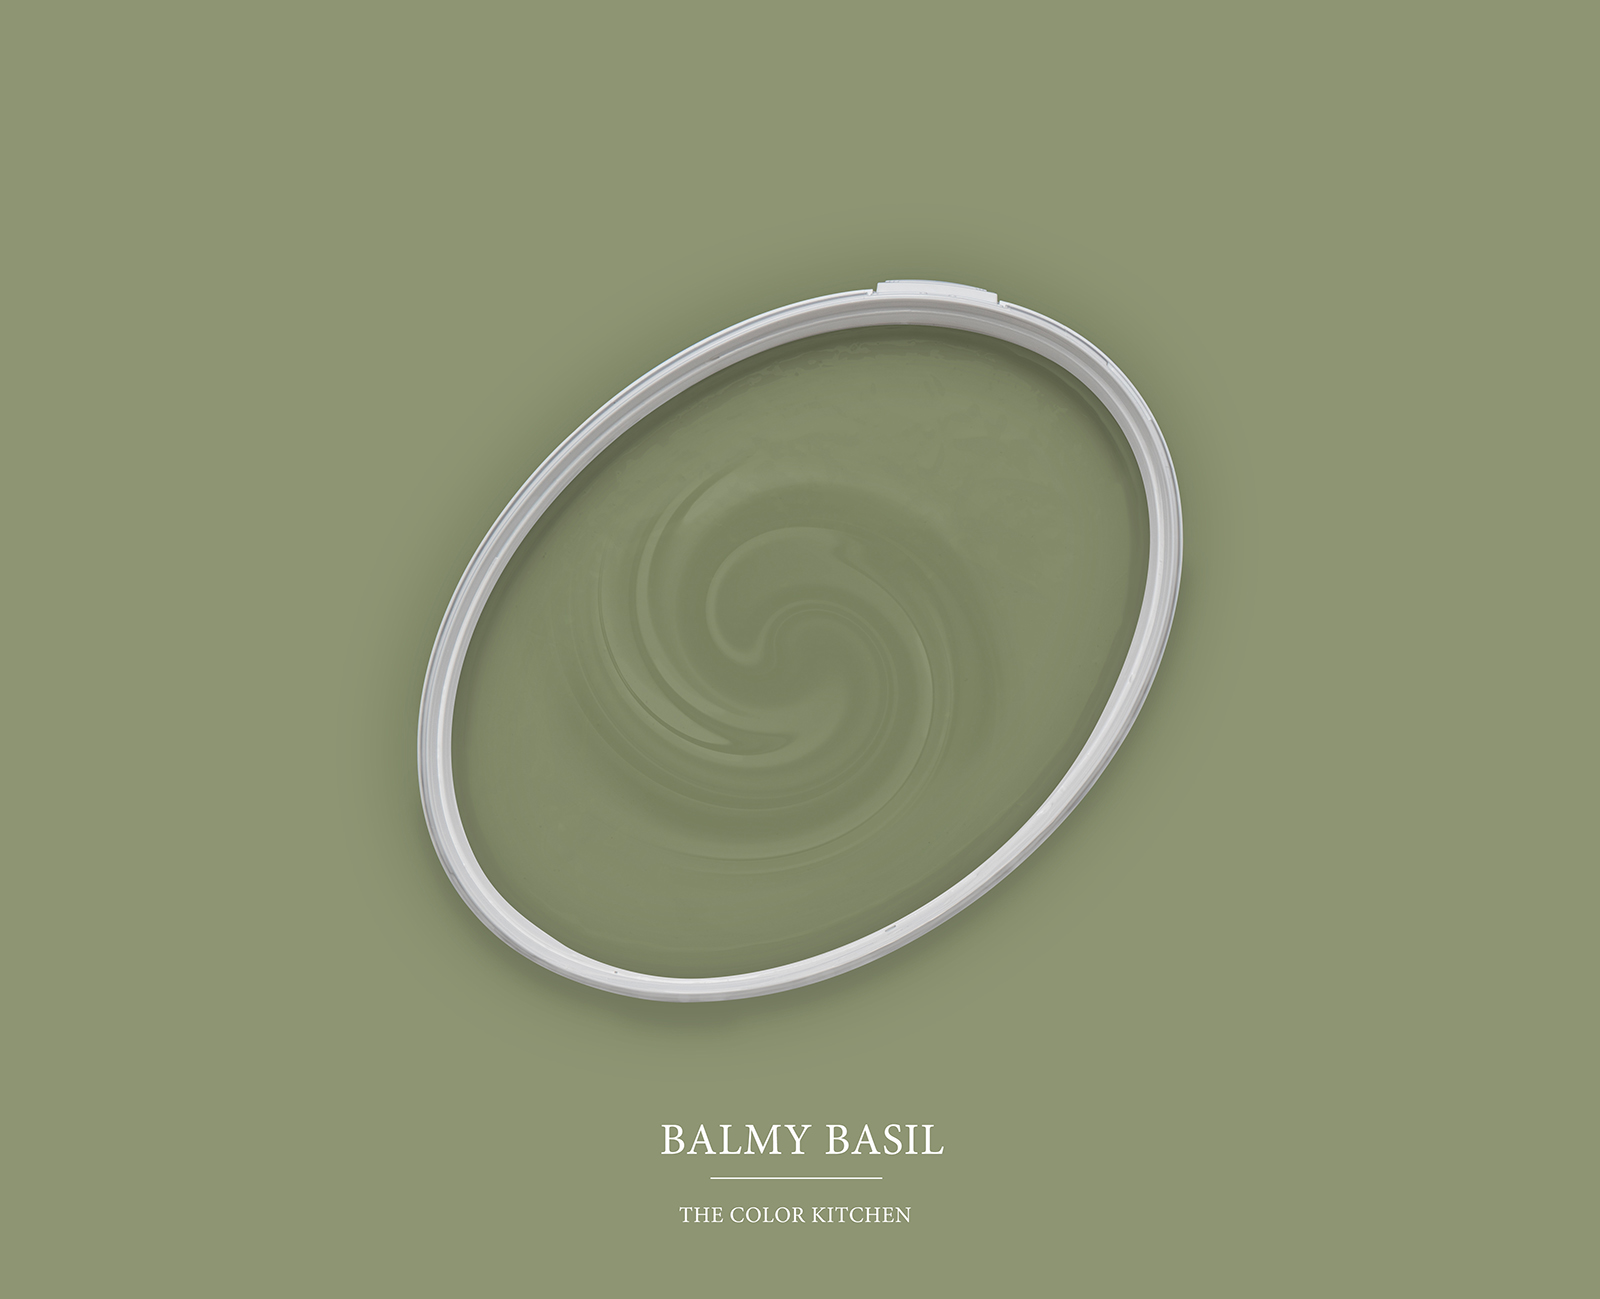         Wall Paint TCK4002 »Balmy Basil« in homely green – 2.5 litre
    